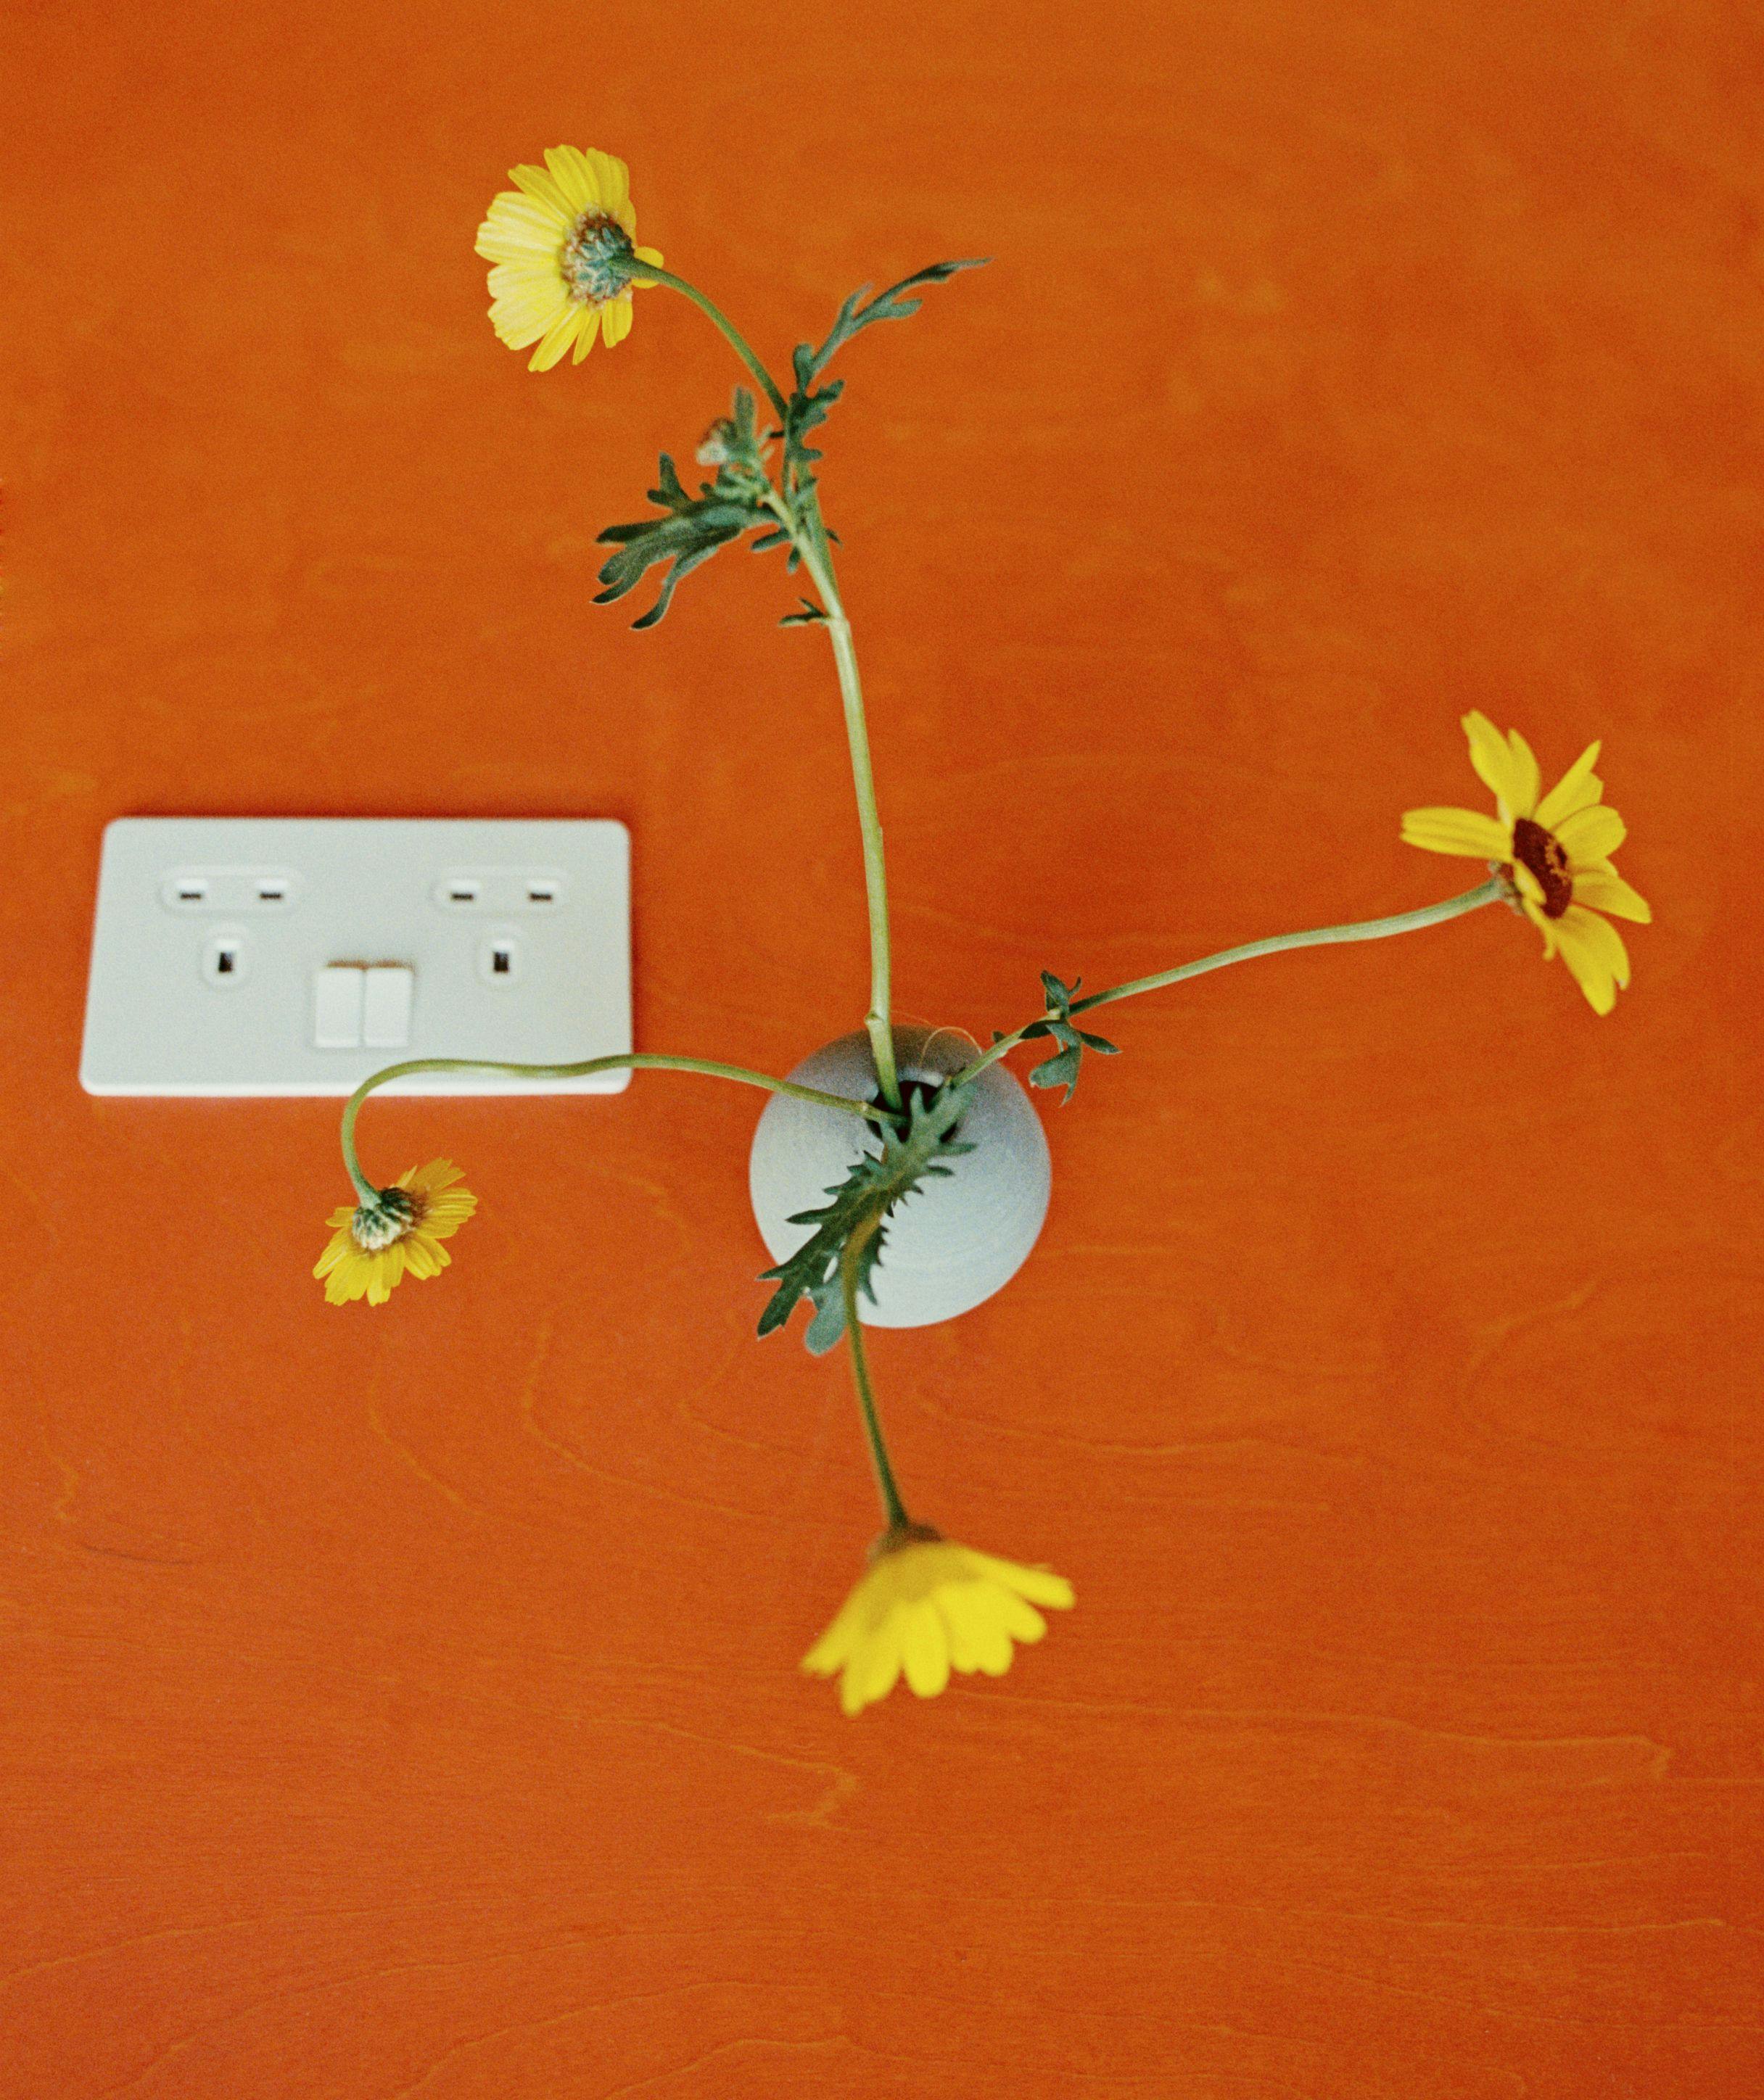 Yellow flowers on a orange table seen from above